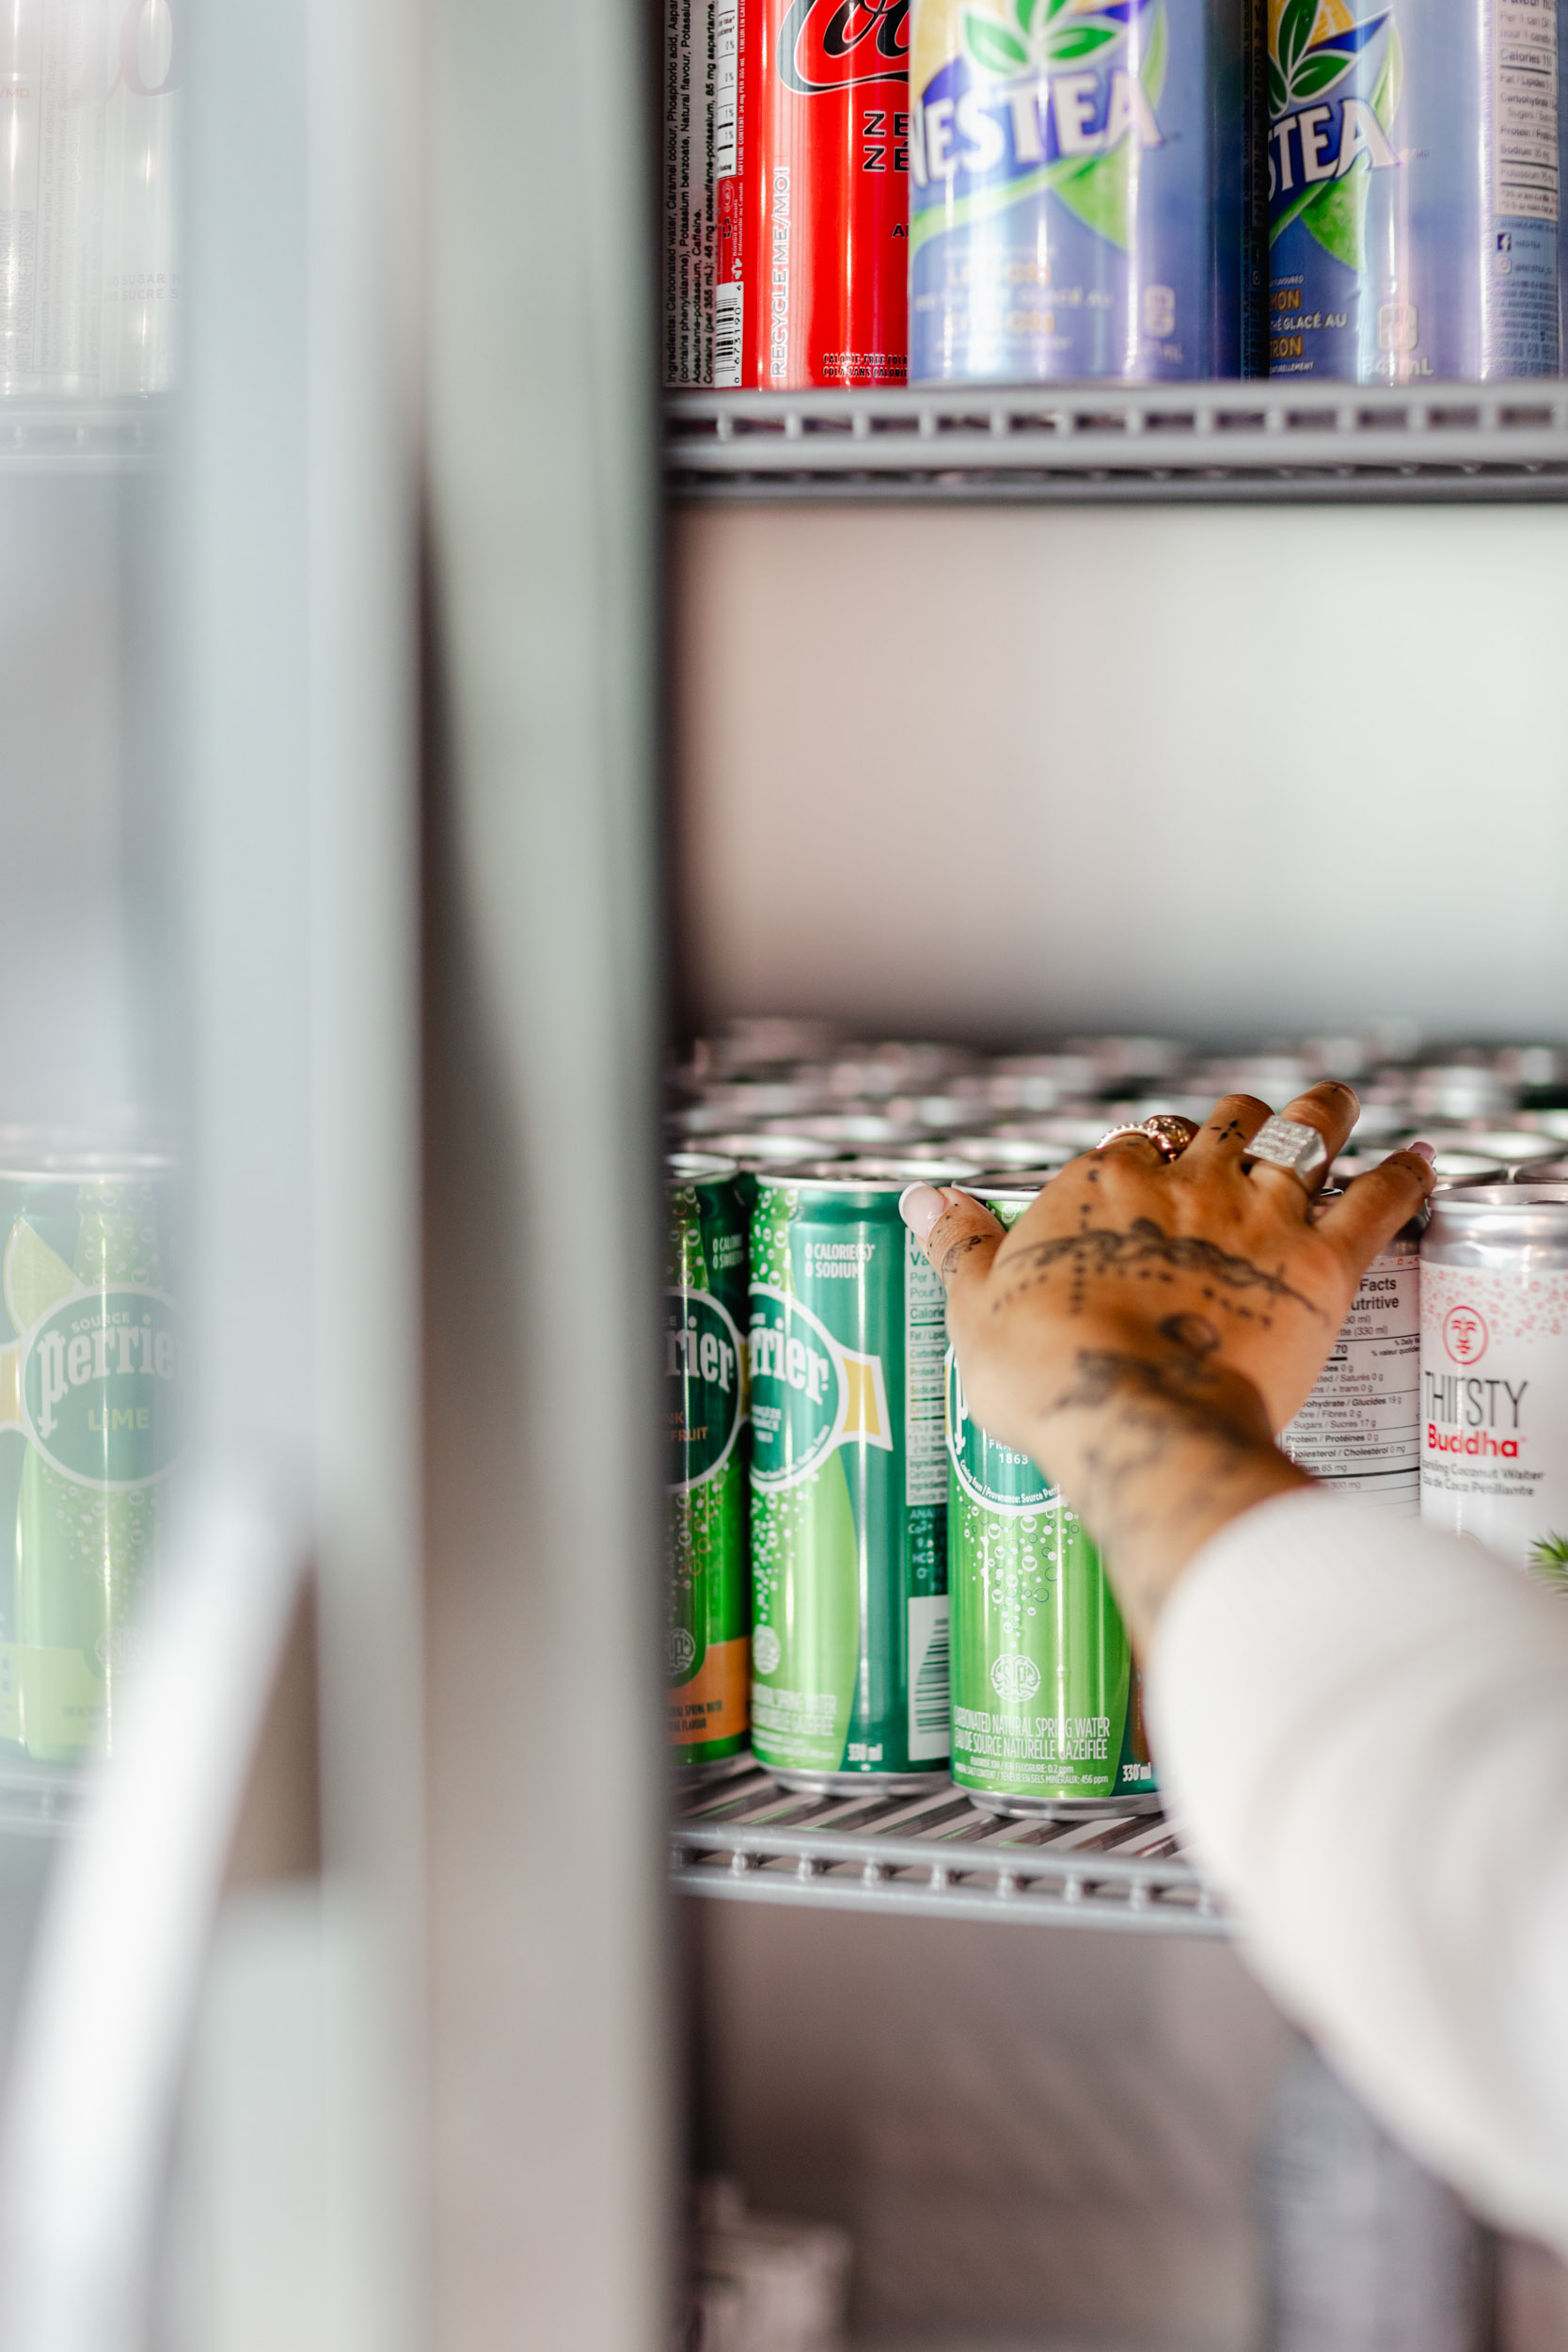 A hand reaching into an Index Exchange refrigerator full of cans.